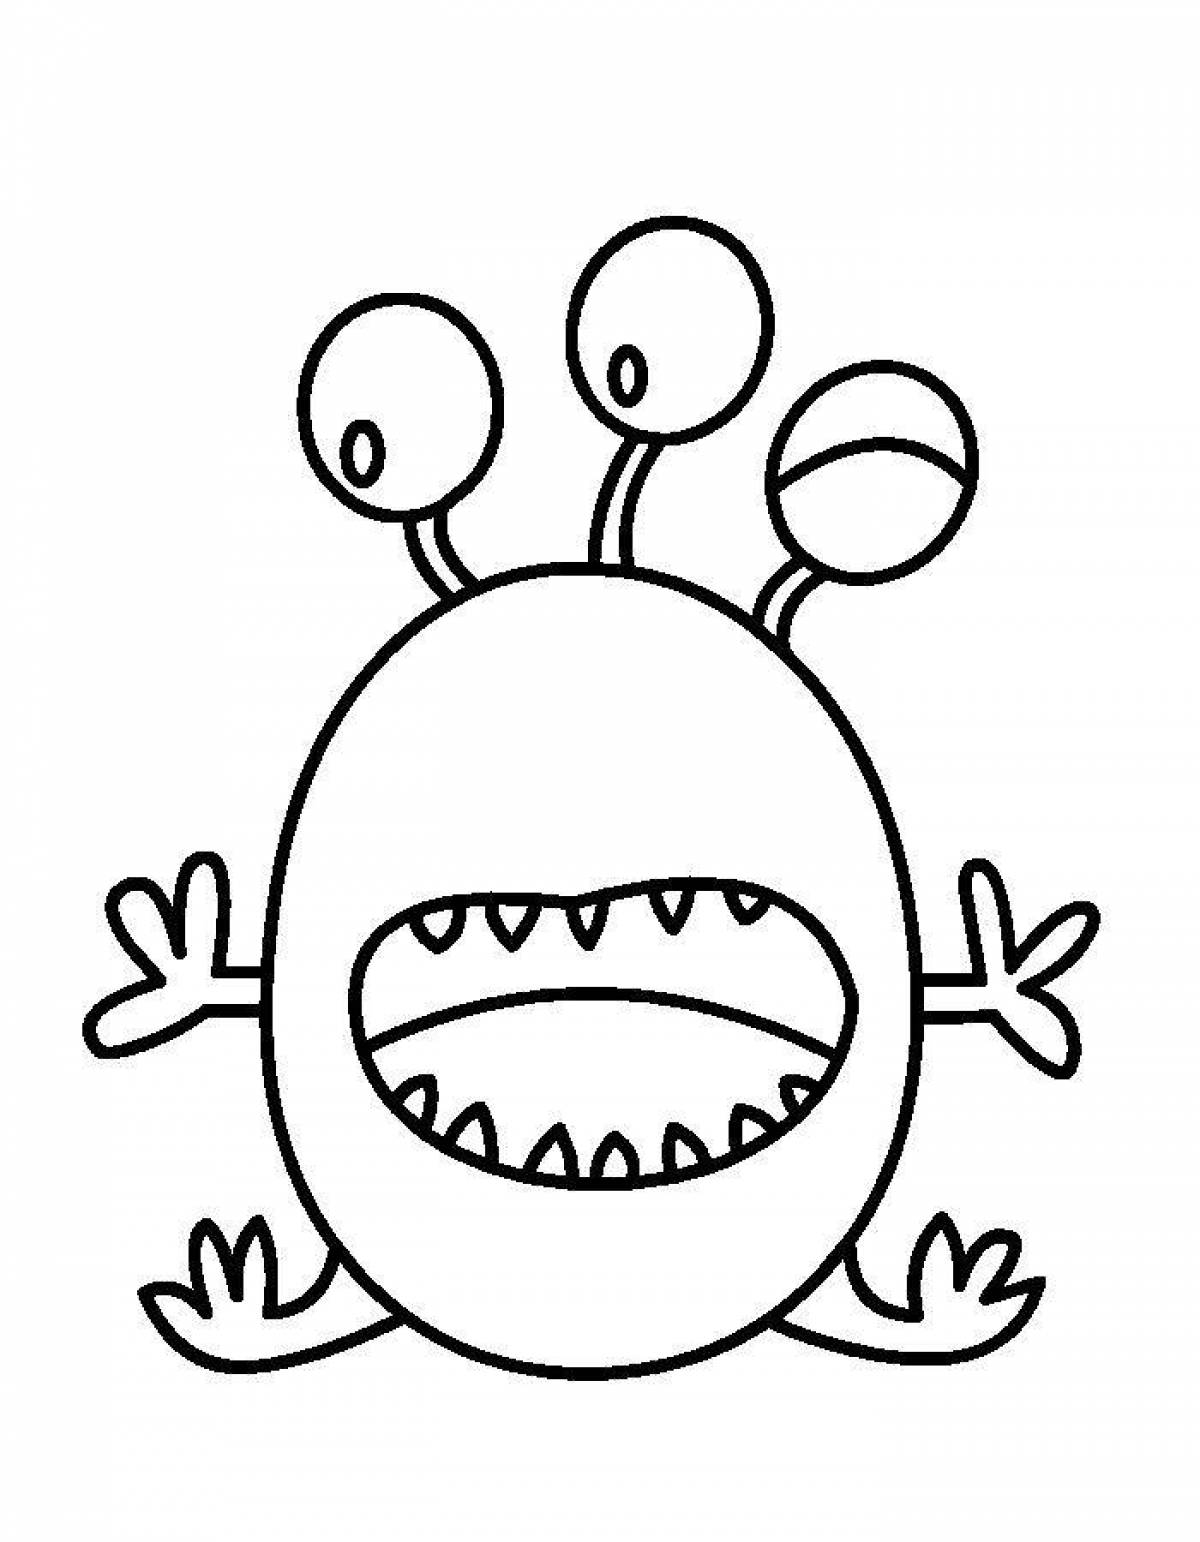 Exploding color monsters coloring pages for kids